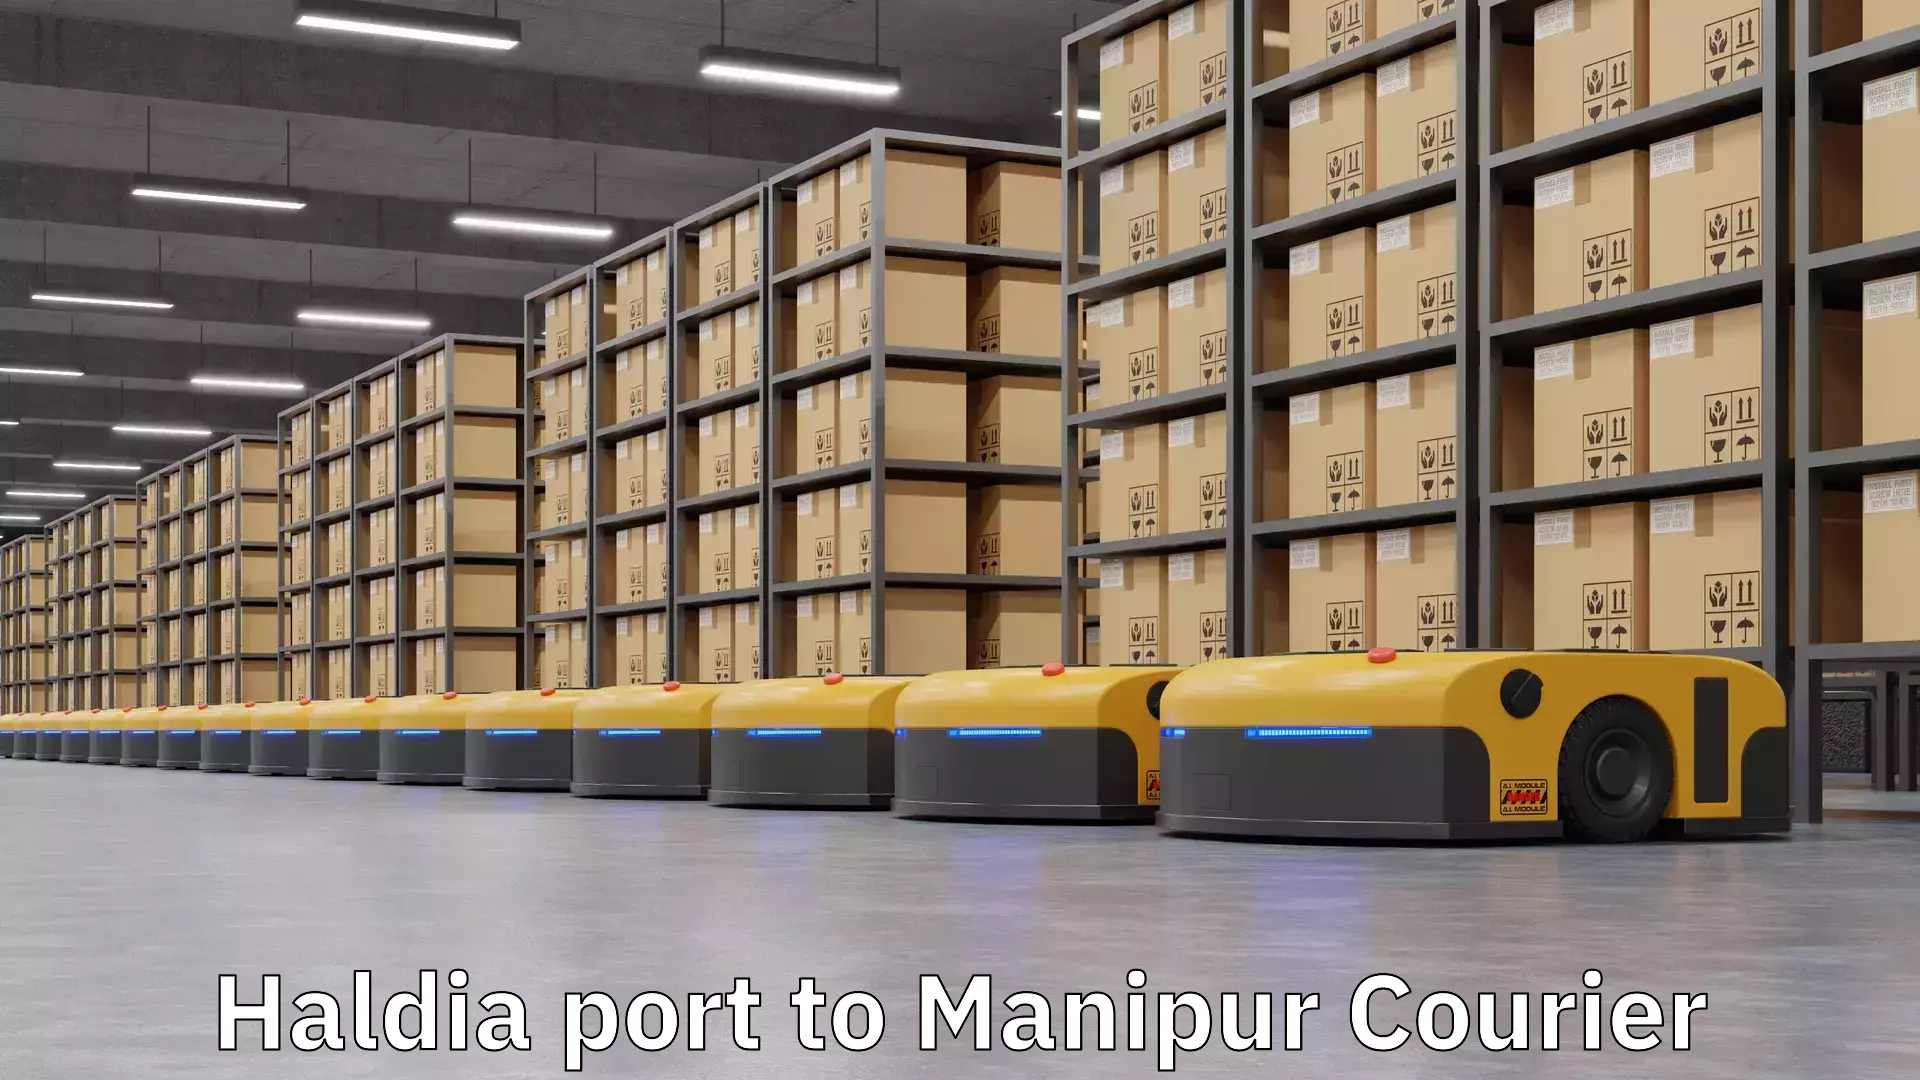 Business courier solutions Haldia port to Manipur